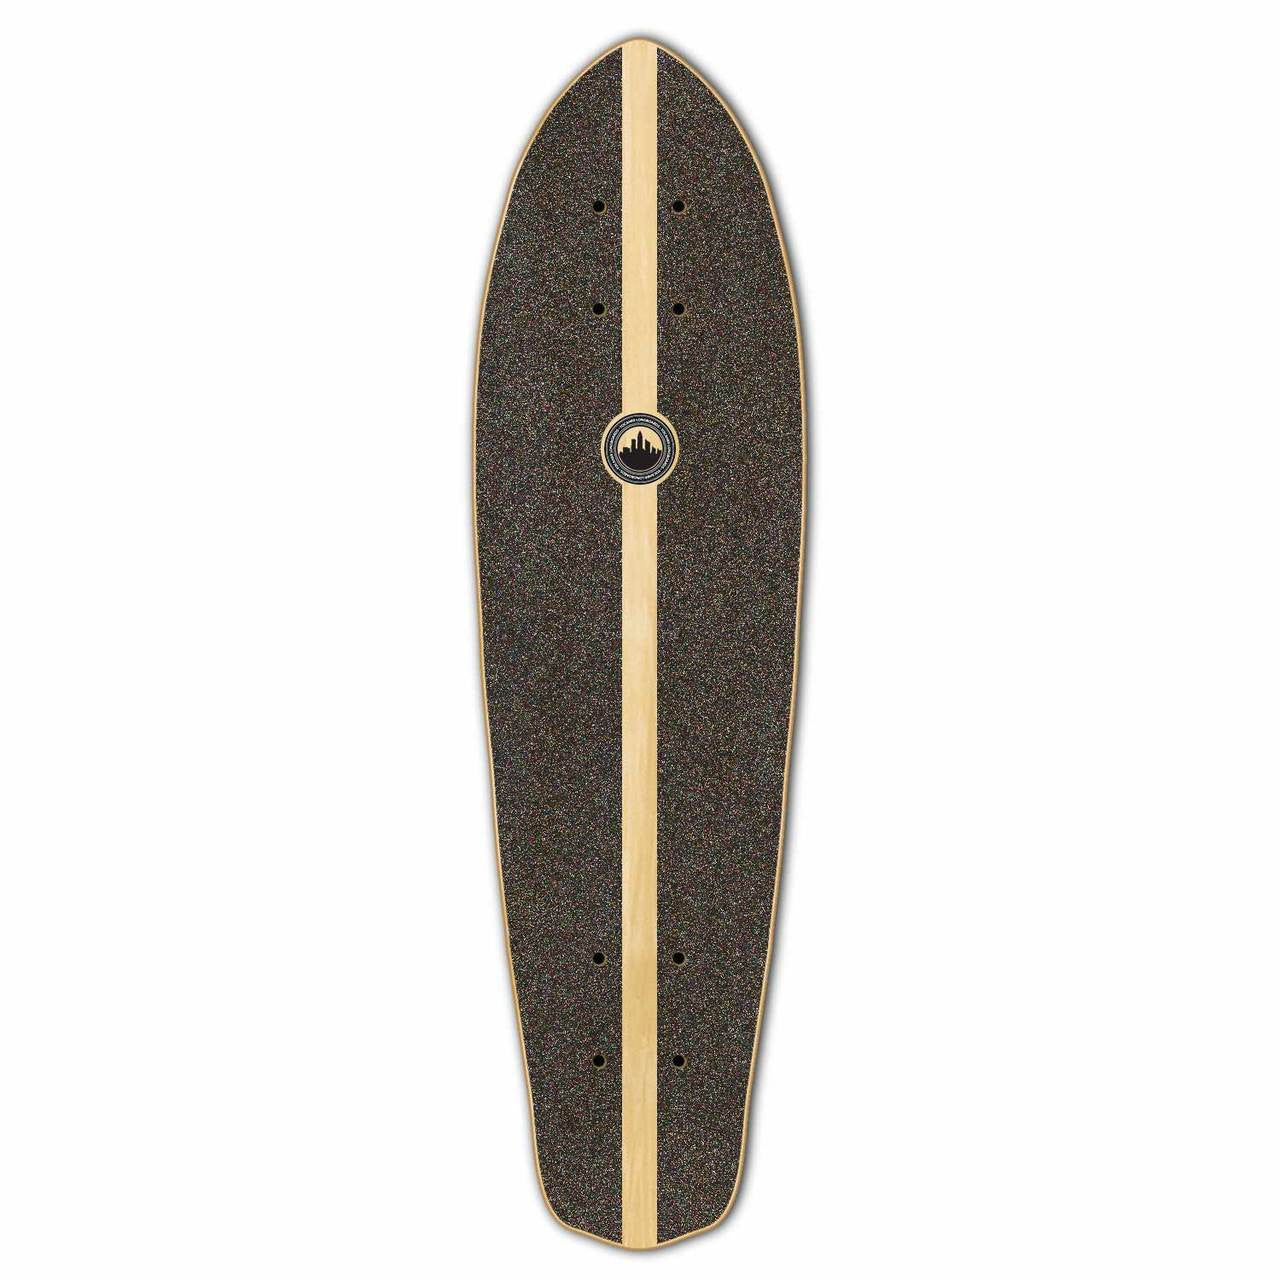 Yocaher Micro Cruiser Blank  Deck - Stained Green